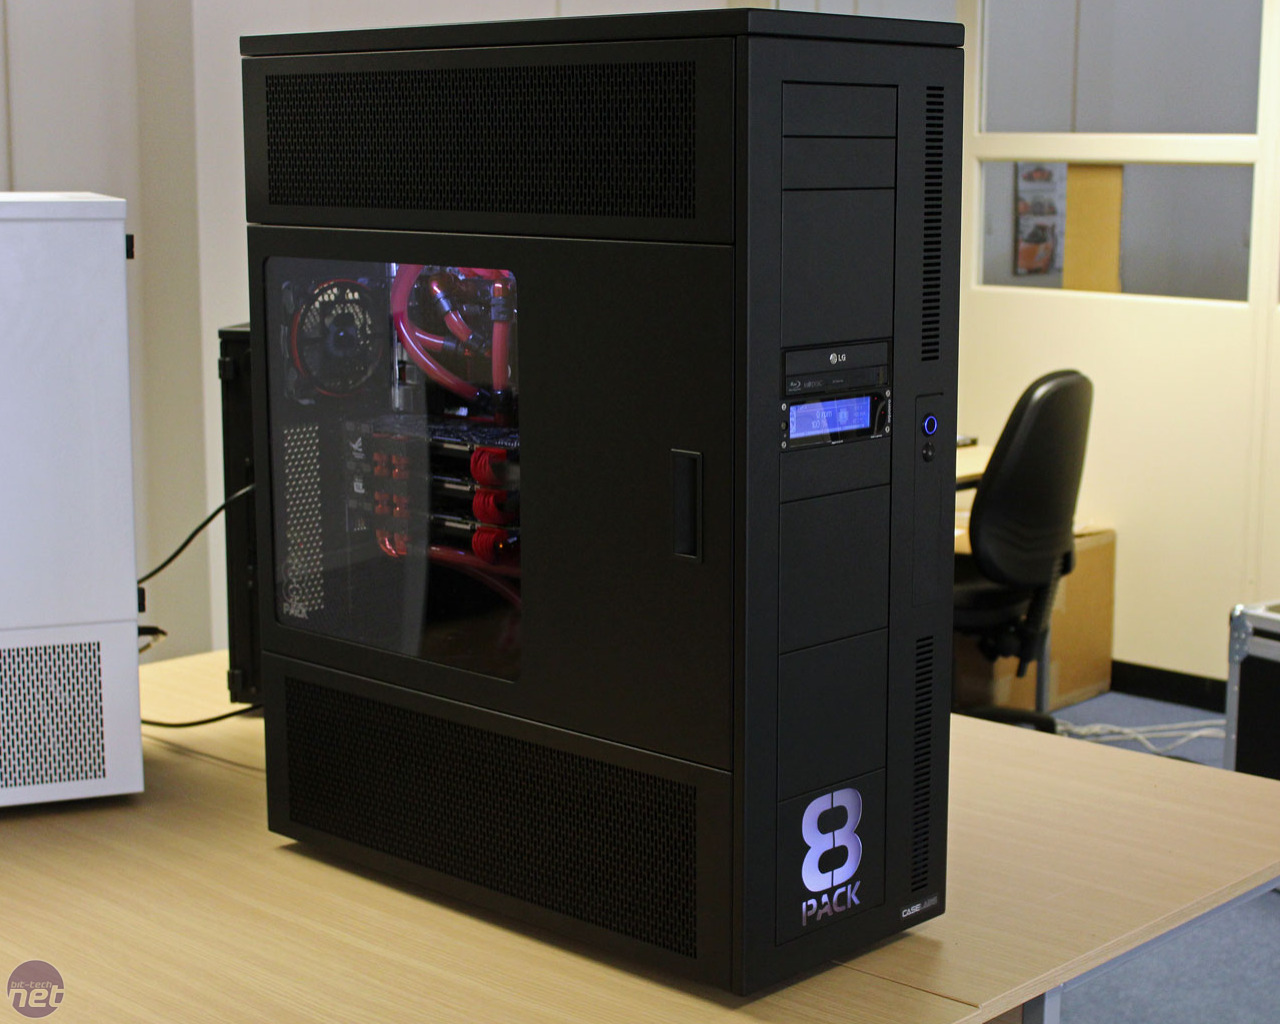 Overclockers UK 8Pack Systems Preview and Interview | bit ...
